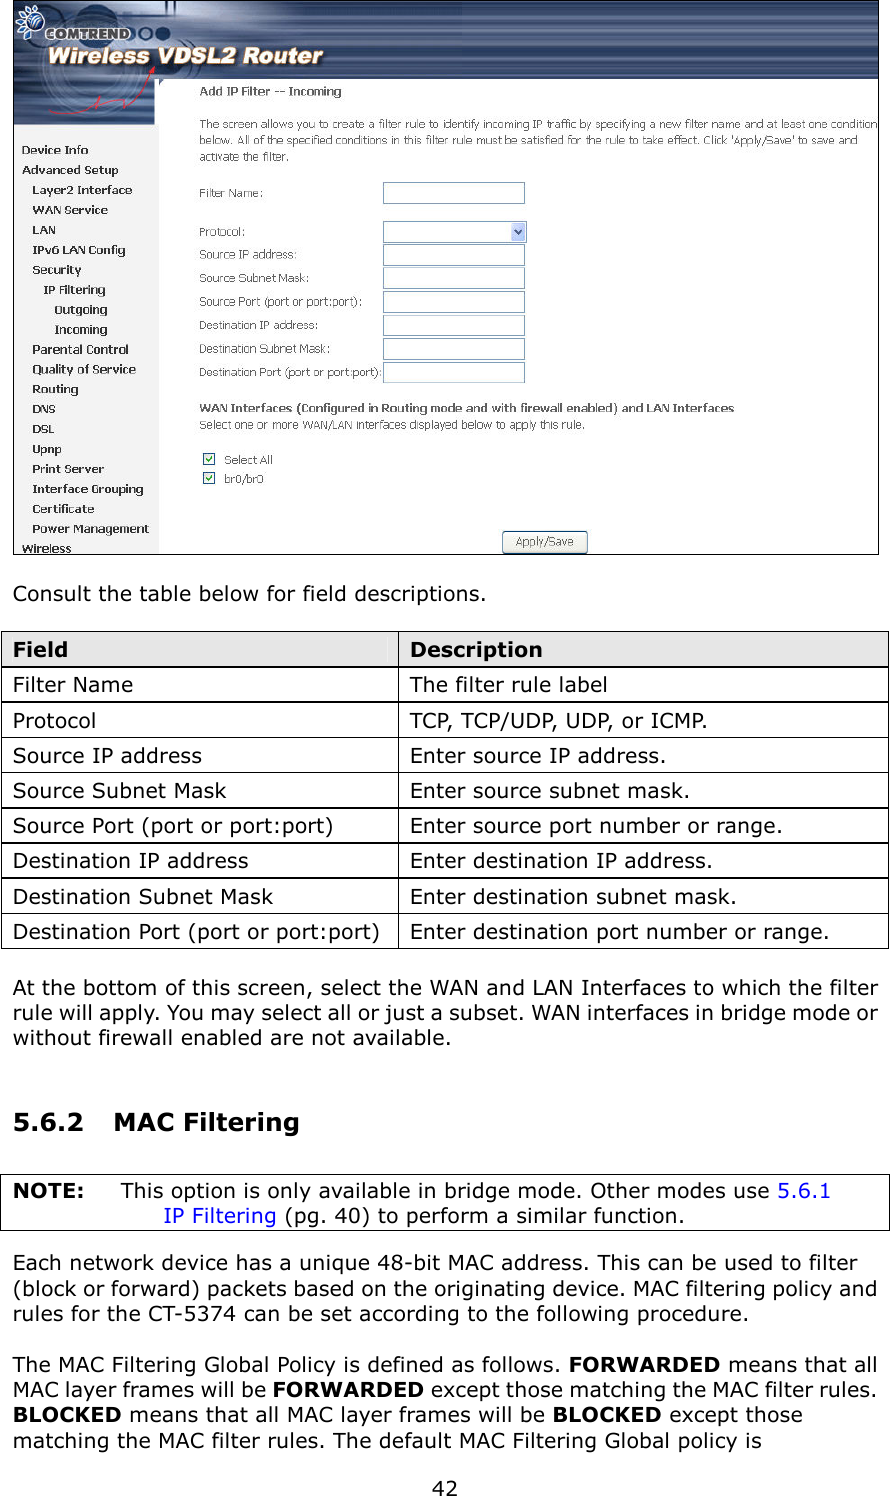   42   Consult the table below for field descriptions.  Field  Description Filter Name  The filter rule label Protocol  TCP, TCP/UDP, UDP, or ICMP. Source IP address  Enter source IP address. Source Subnet Mask  Enter source subnet mask. Source Port (port or port:port)  Enter source port number or range. Destination IP address  Enter destination IP address. Destination Subnet Mask  Enter destination subnet mask. Destination Port (port or port:port) Enter destination port number or range.  At the bottom of this screen, select the WAN and LAN Interfaces to which the filter rule will apply. You may select all or just a subset. WAN interfaces in bridge mode or without firewall enabled are not available. 5.6.2  MAC Filtering NOTE:  This option is only available in bridge mode. Other modes use 5.6.1  IP Filtering (pg. 40) to perform a similar function. Each network device has a unique 48-bit MAC address. This can be used to filter (block or forward) packets based on the originating device. MAC filtering policy and rules for the CT-5374 can be set according to the following procedure.    The MAC Filtering Global Policy is defined as follows. FORWARDED means that all MAC layer frames will be FORWARDED except those matching the MAC filter rules.   BLOCKED means that all MAC layer frames will be BLOCKED except those matching the MAC filter rules. The default MAC Filtering Global policy is 